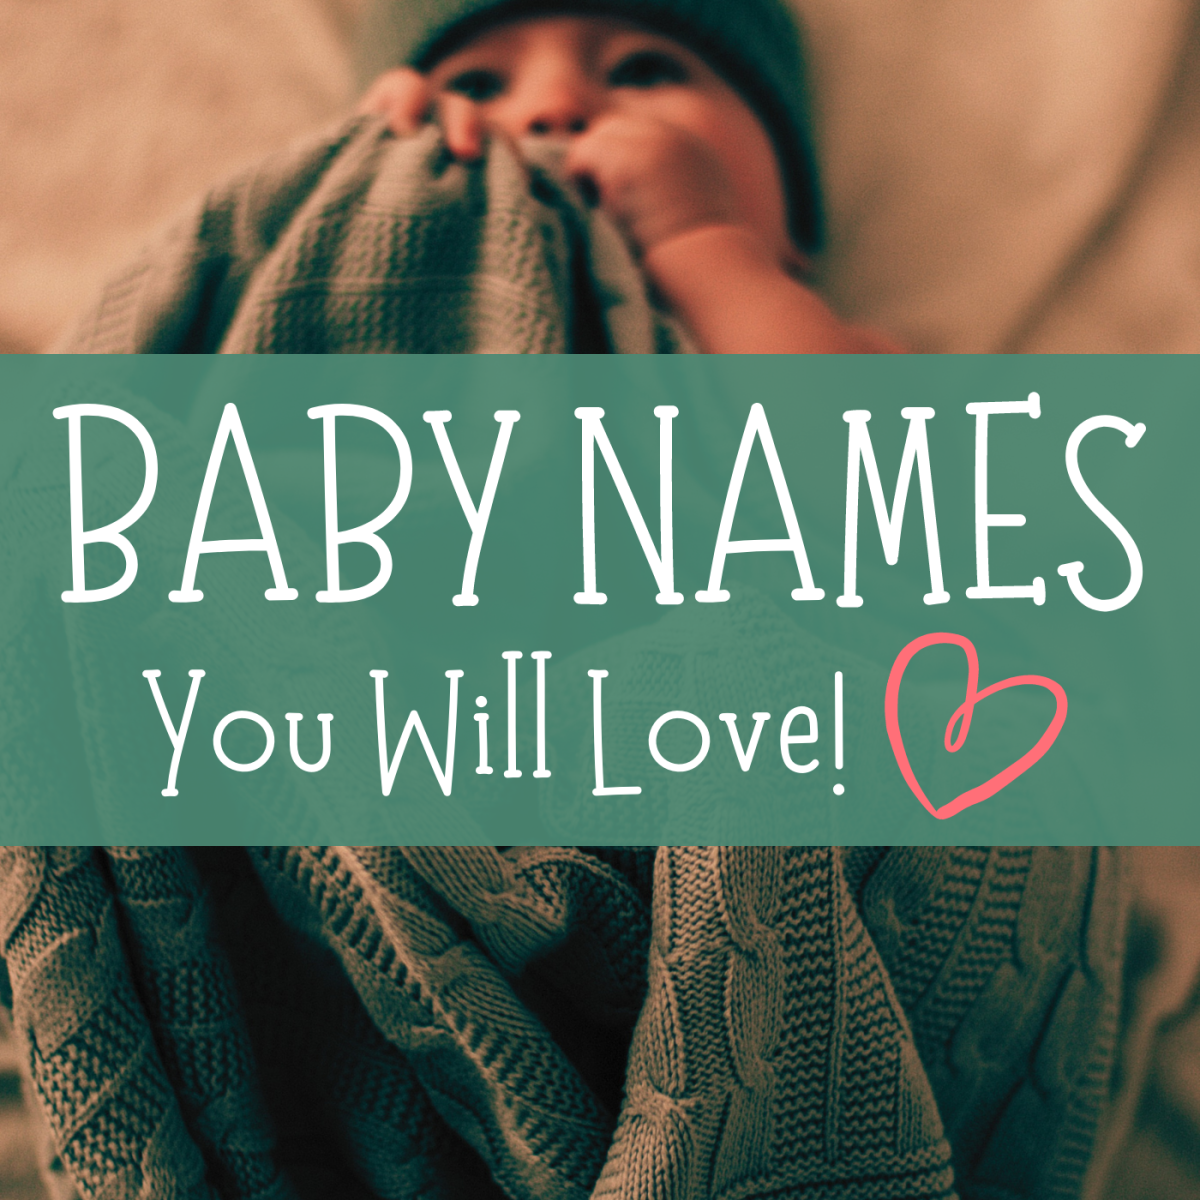 Baby Name Ideas You'll Love